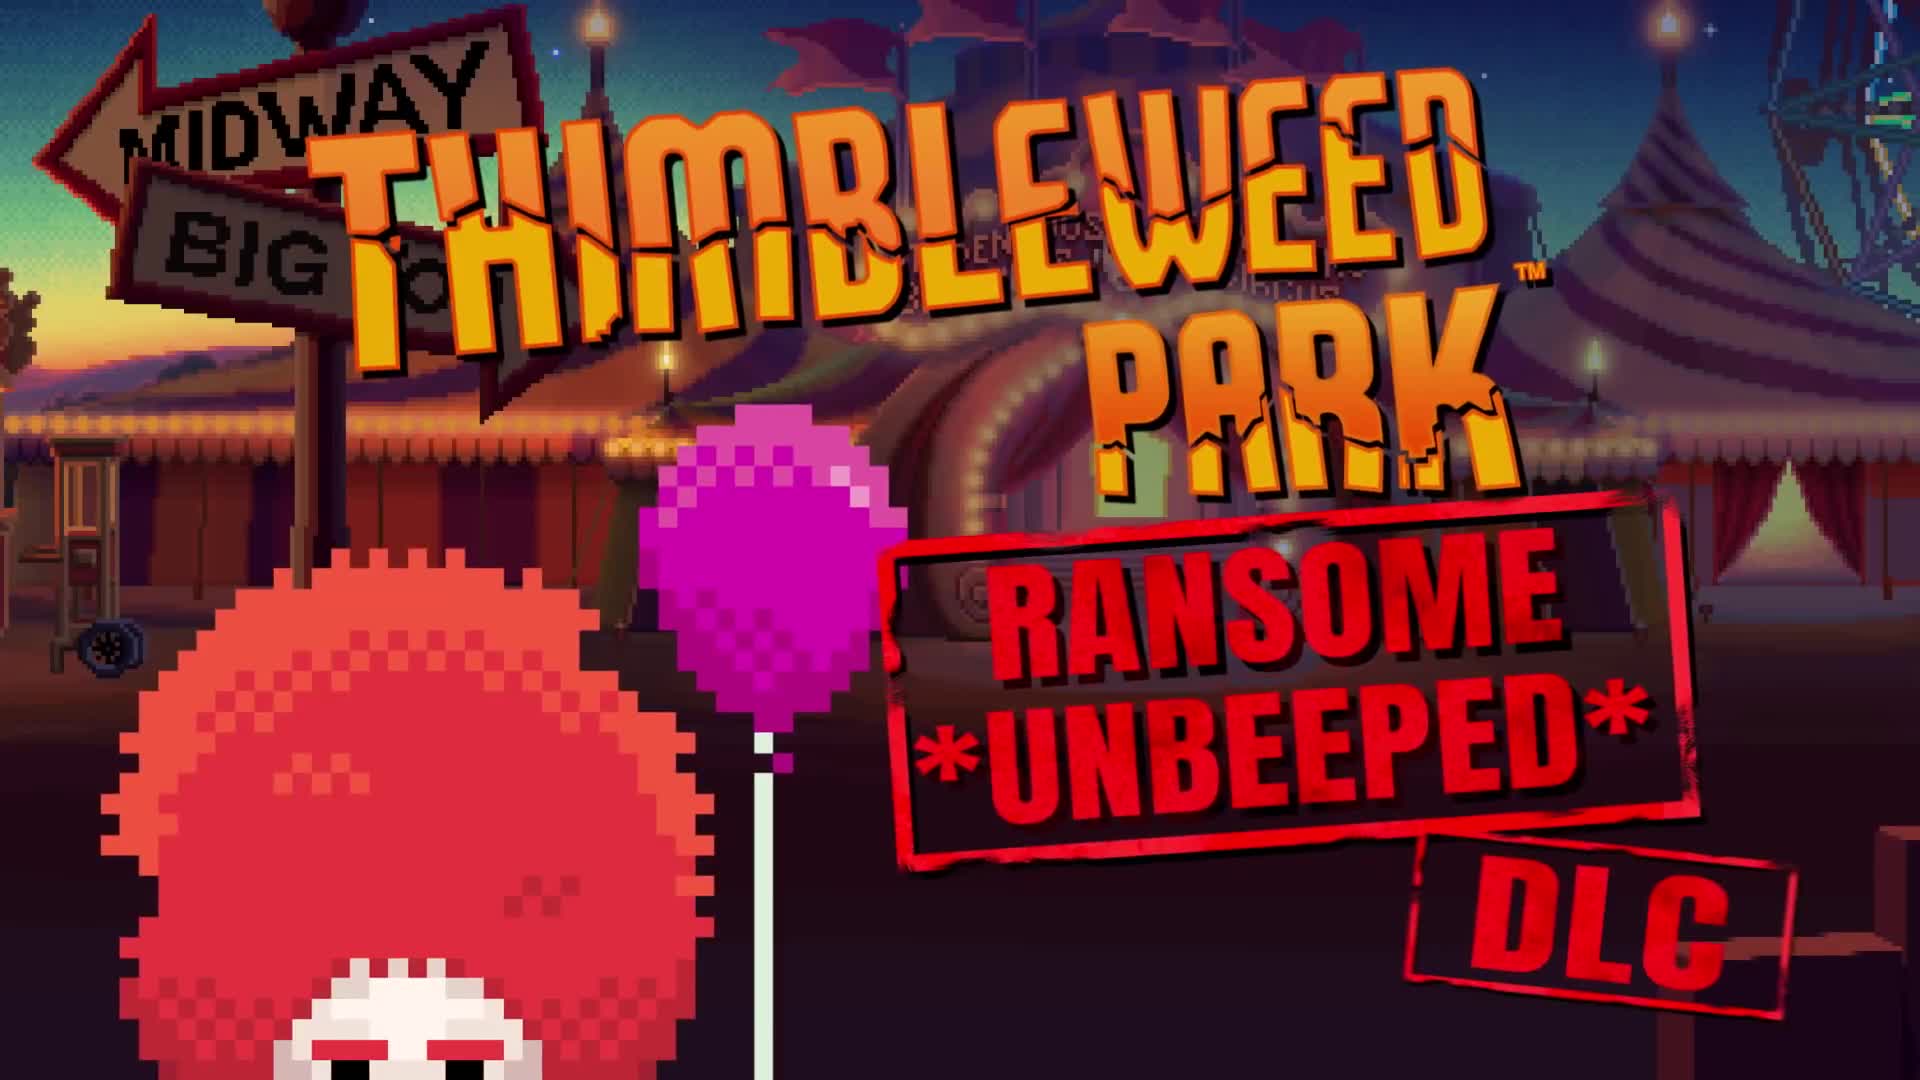 Thimbleweed Park - Ransome *unbeeped* DLC